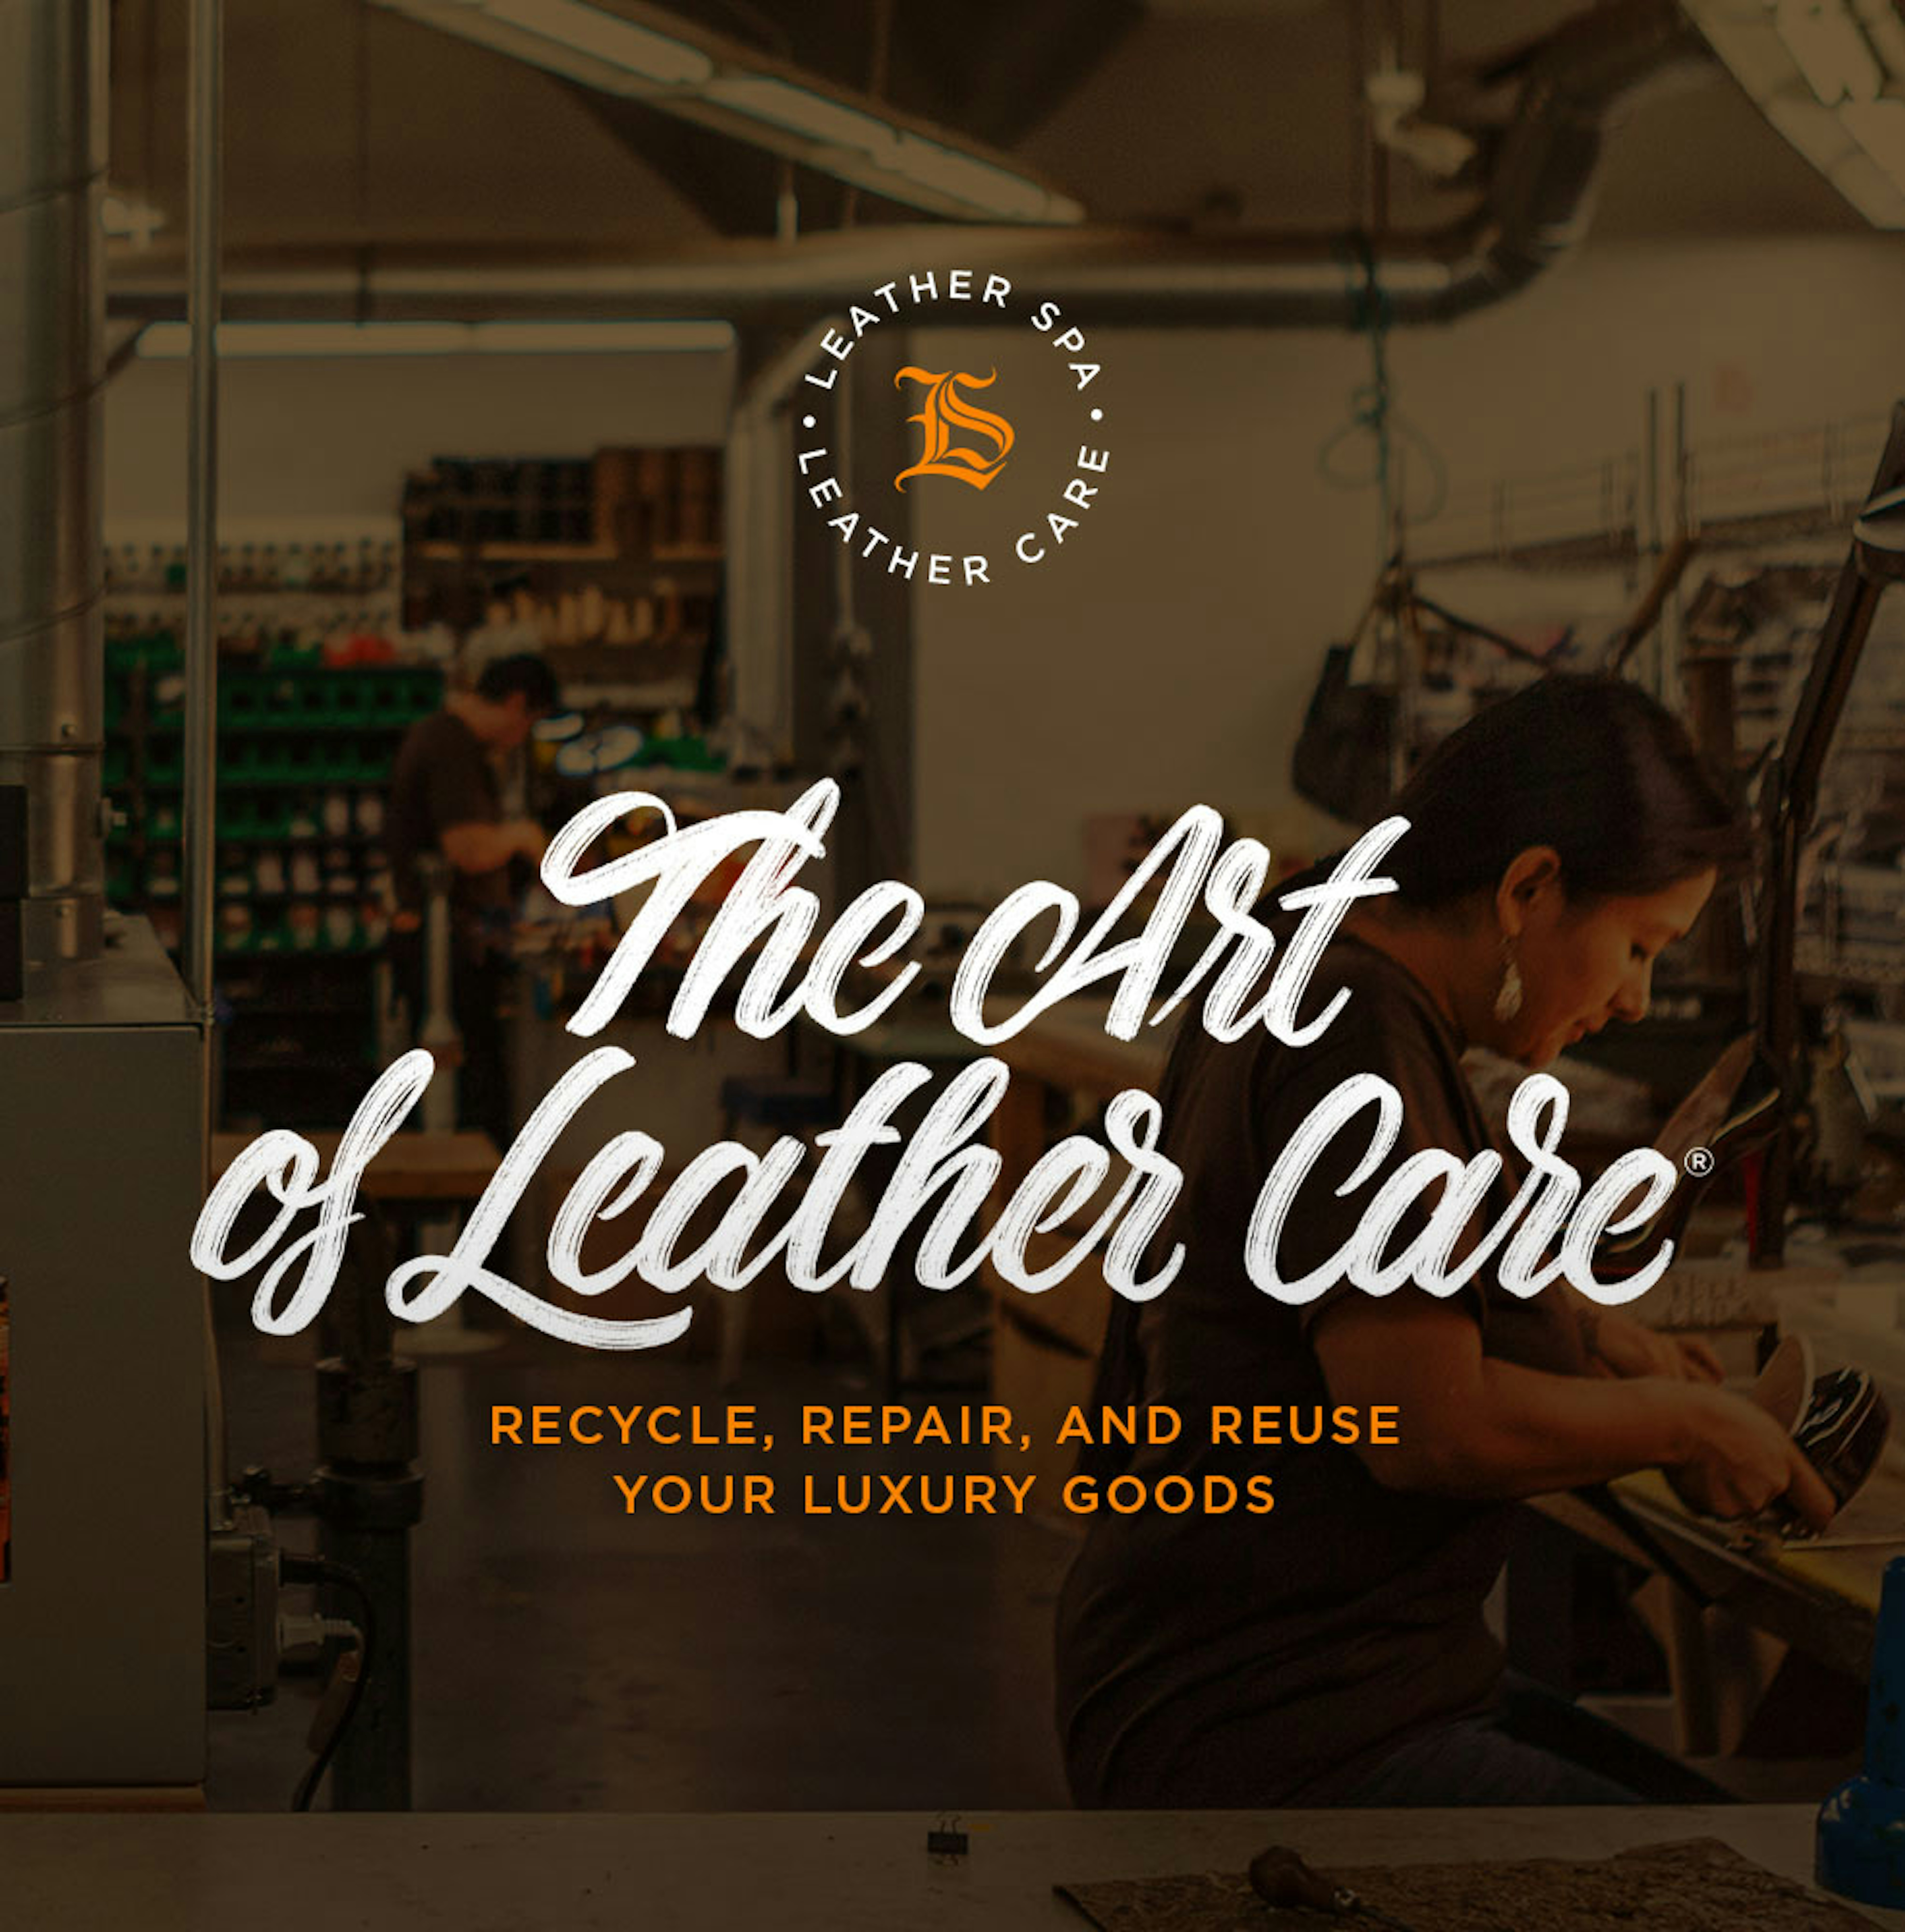 LEATHER SPA - All kinds of bags at the spa. 👜🎒#hermes #ysl #chanel  #louisvuitton #leatherspa #nyc #luxury #shoes #shoecare #handbagcare  #leathercare #leatherjackets #theartofshoerepair #theartofleathercare